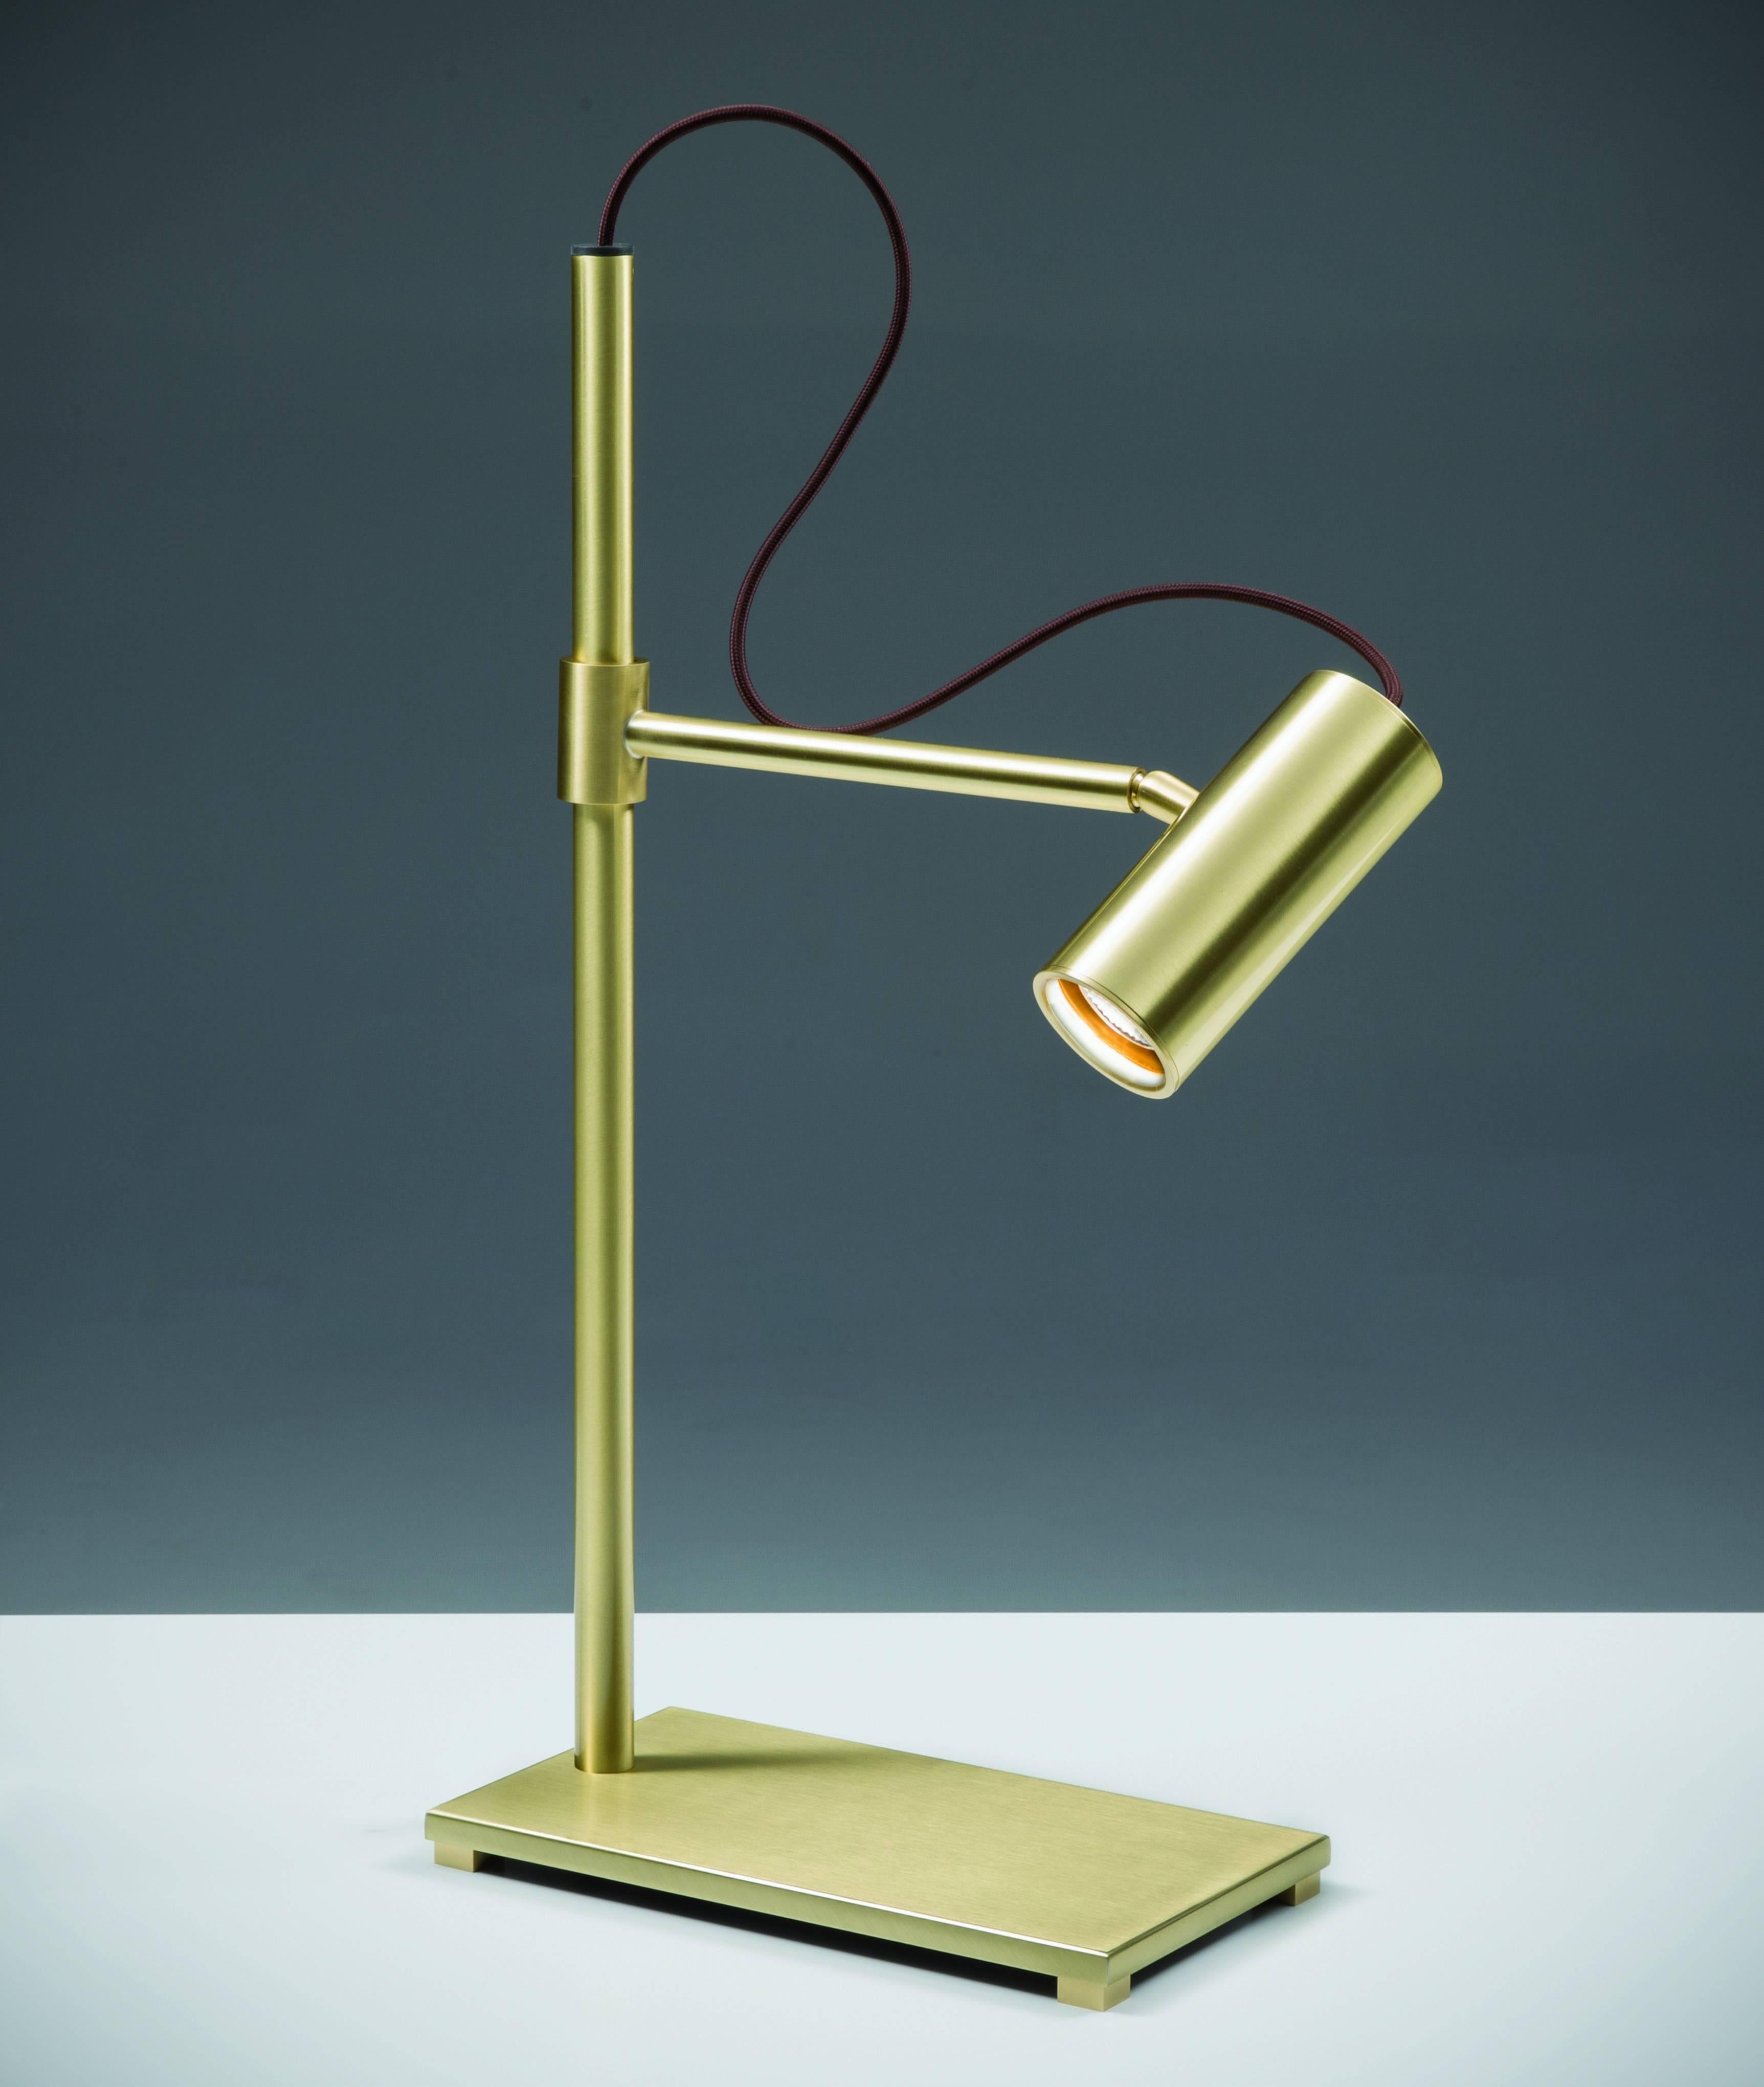 Beautiful table lamp.
Lacquers, brass and chrome finishes available.
Designer: William Pianta.
100% Made in Italy.